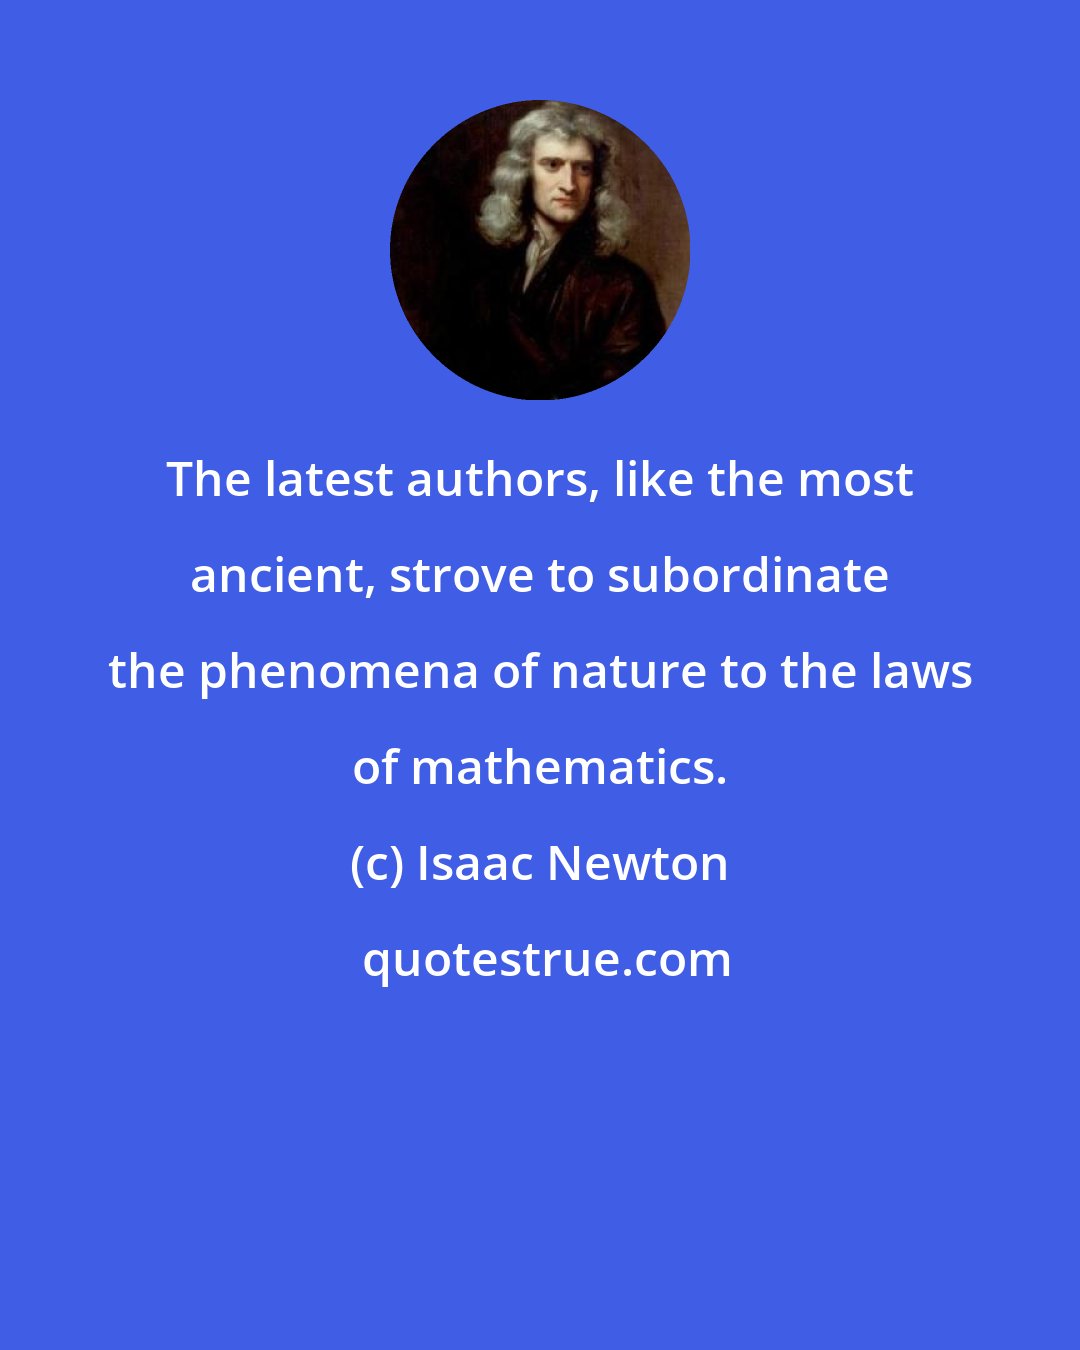 Isaac Newton: The latest authors, like the most ancient, strove to subordinate the phenomena of nature to the laws of mathematics.